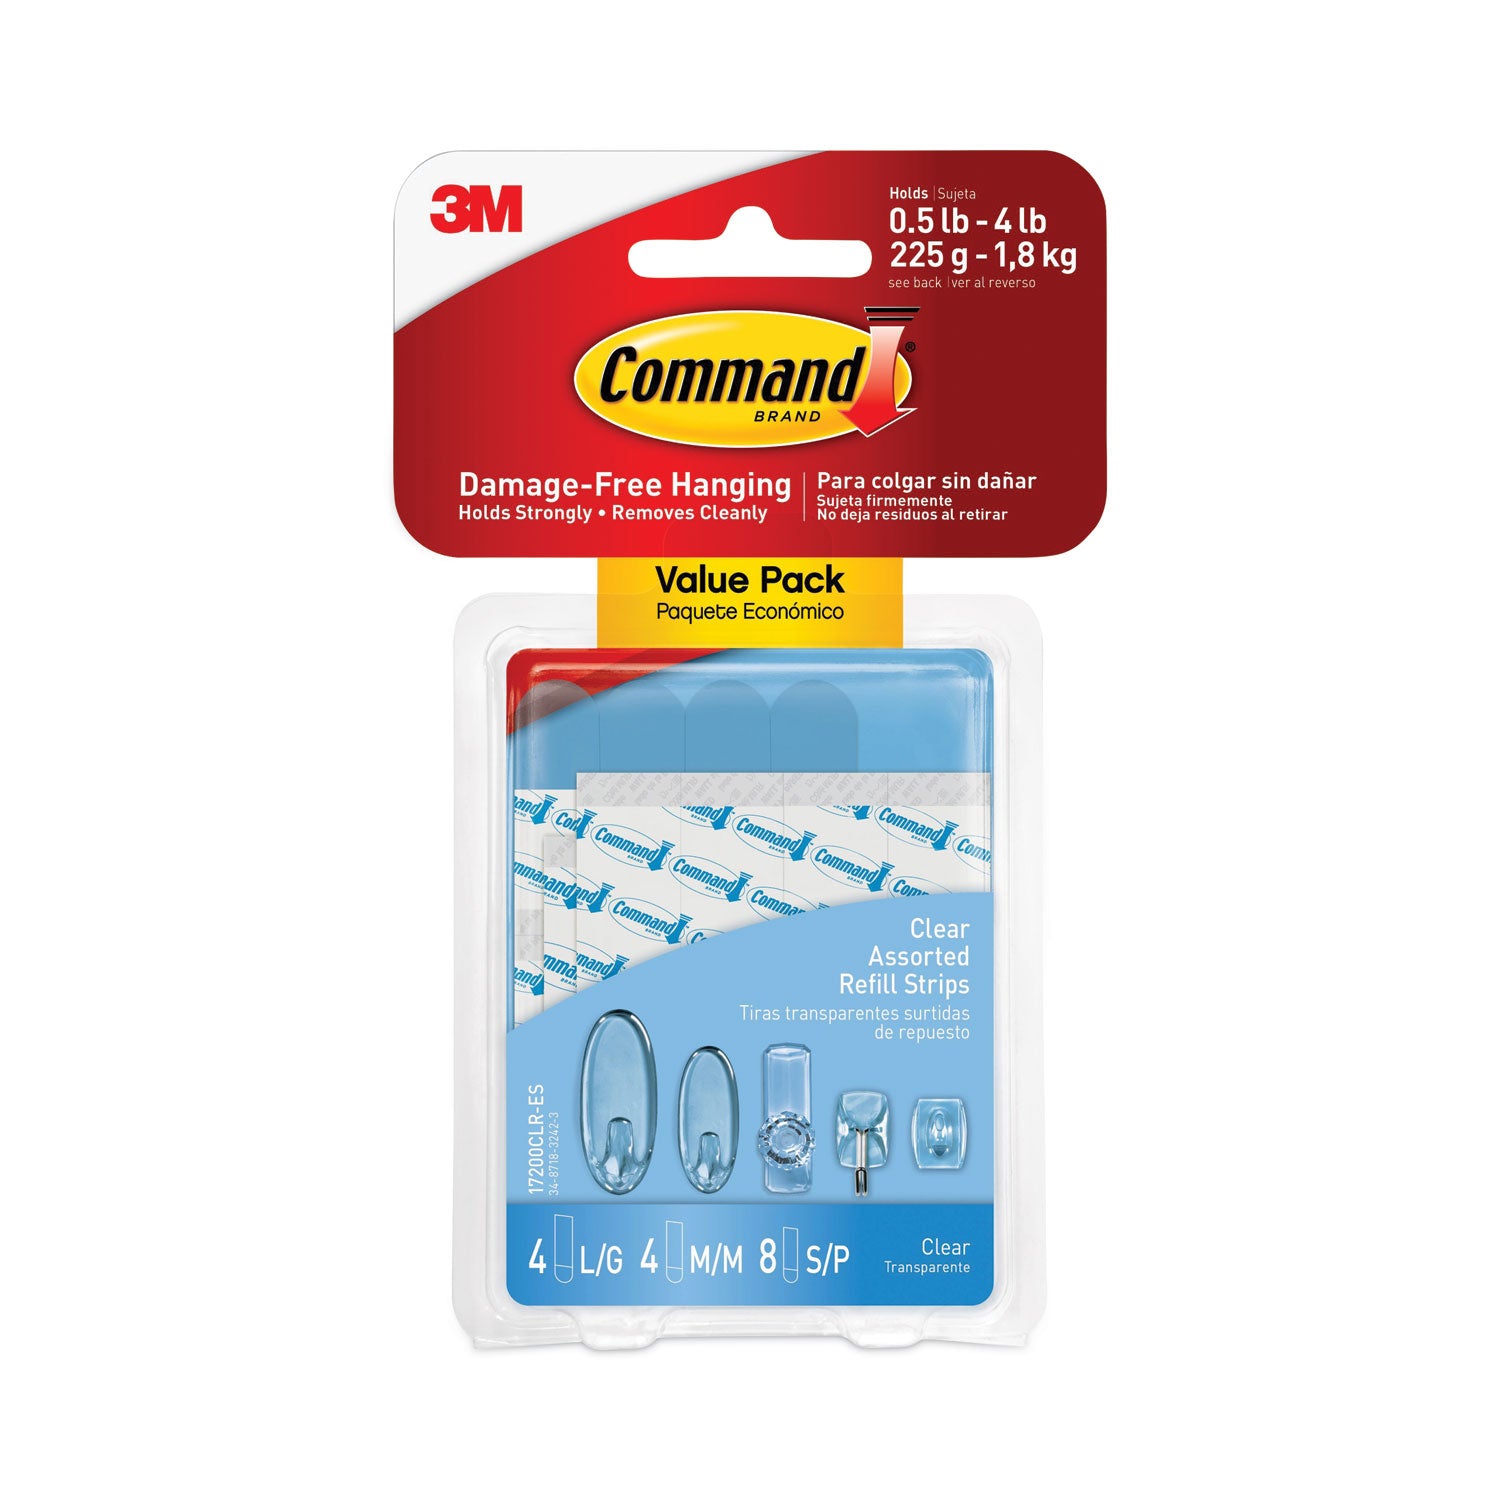 assorted-refill-strips-removable-8-small-075-x-175-4-medium-075-x-275-4-large-075-x-375-clear-16-pack_mmm17200clres - 1